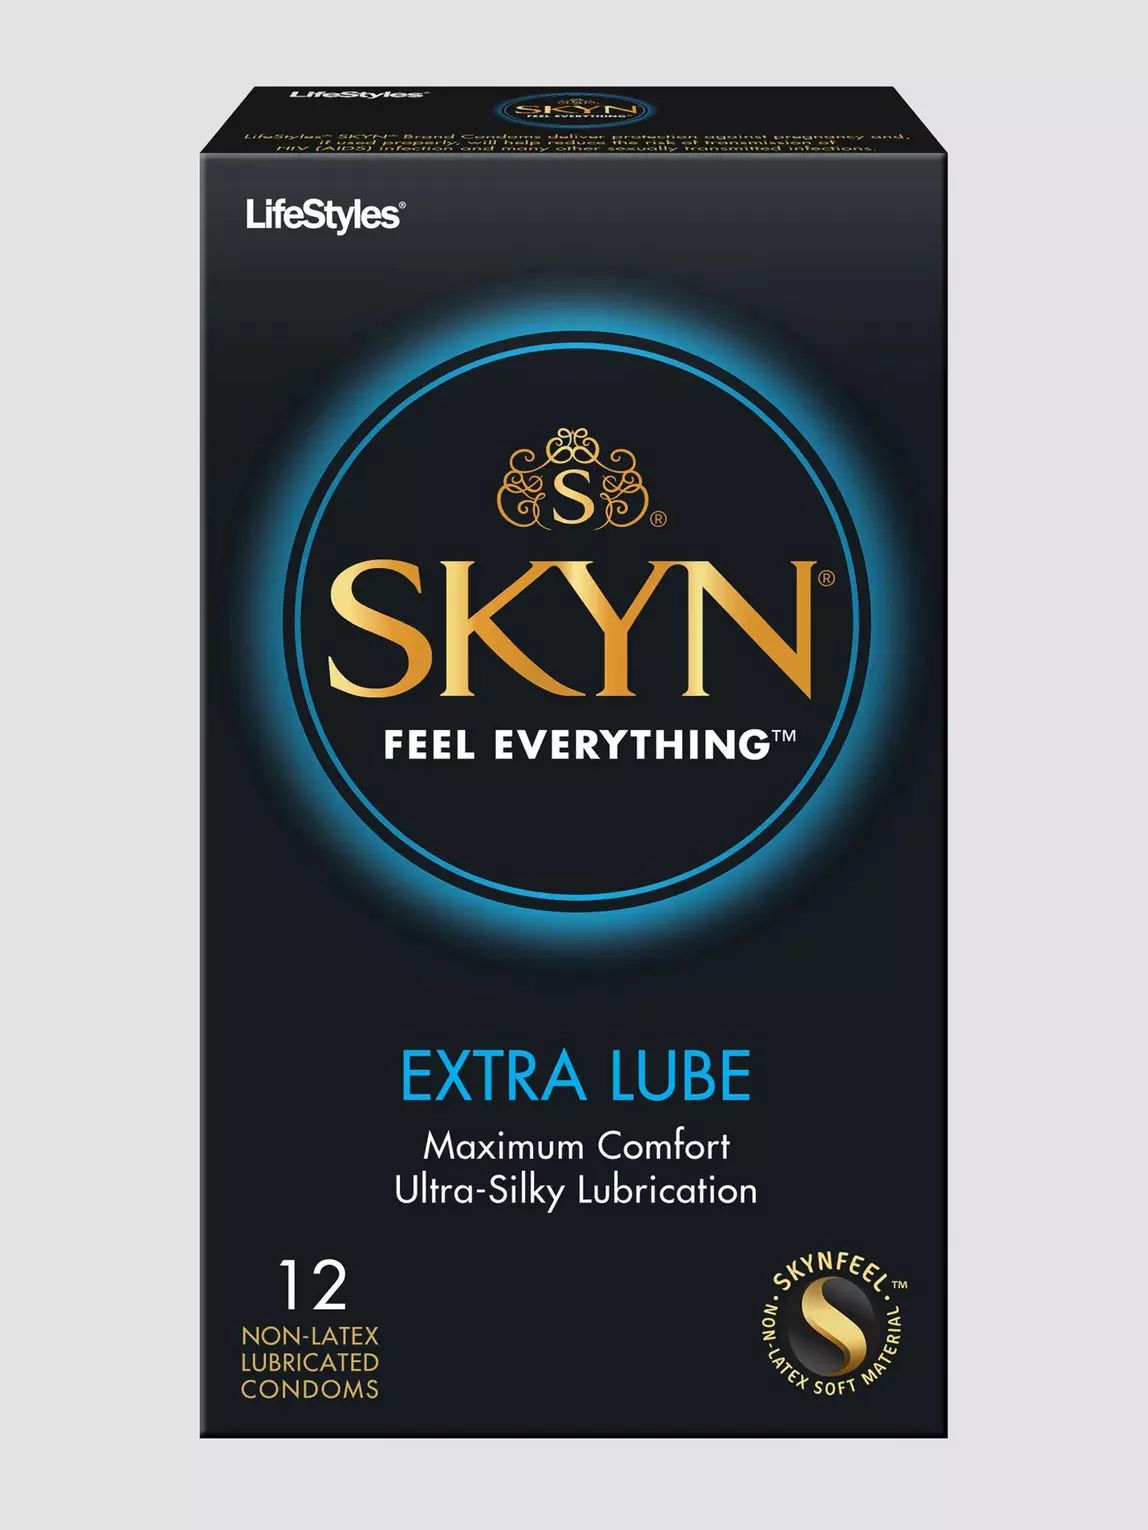 LifeStyles SKYN Extra Lubricated Non Latex Condoms (12 Count) | Lovehoney US